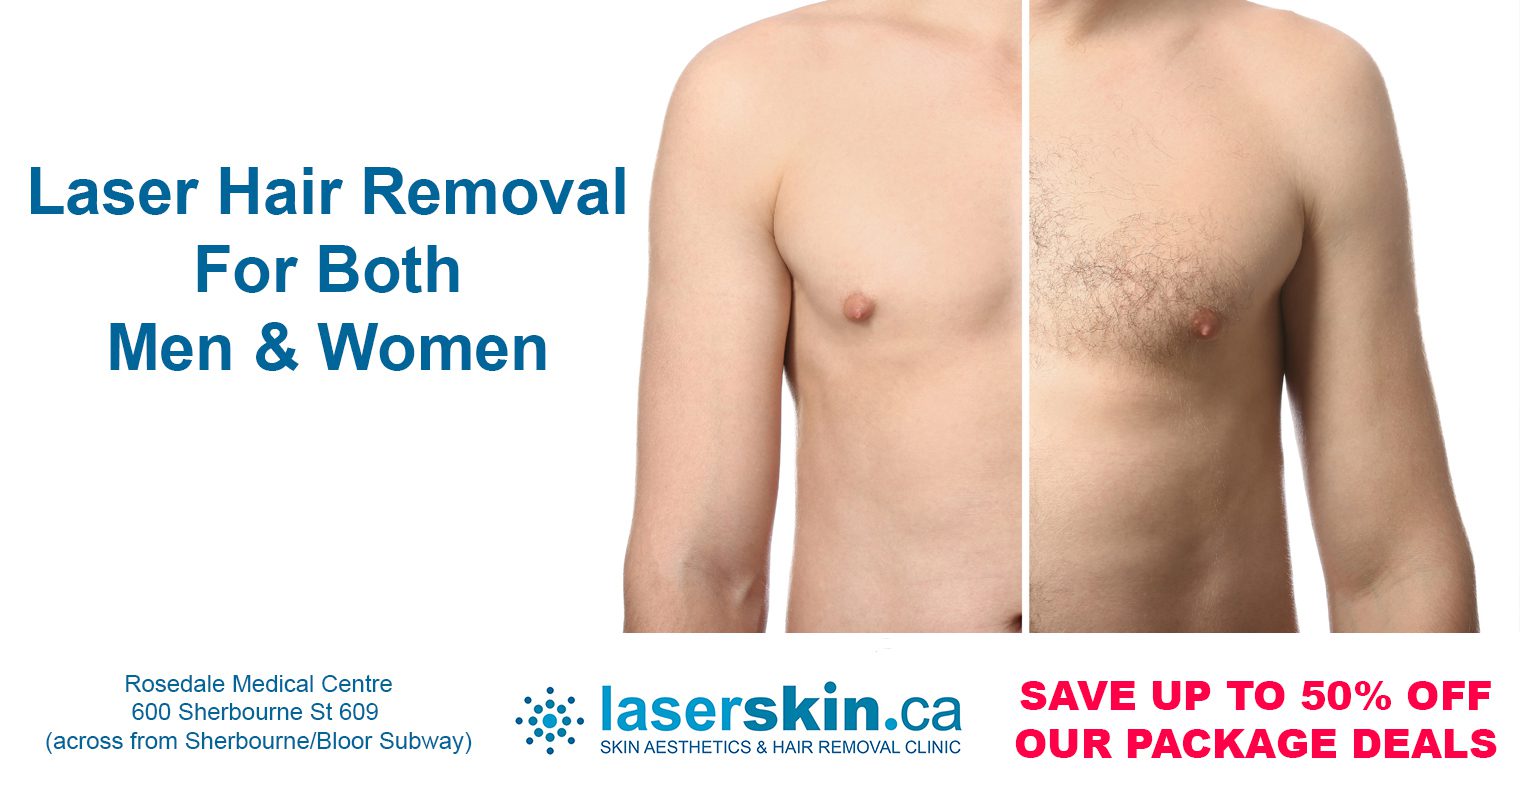 How much does laser hair removal cost